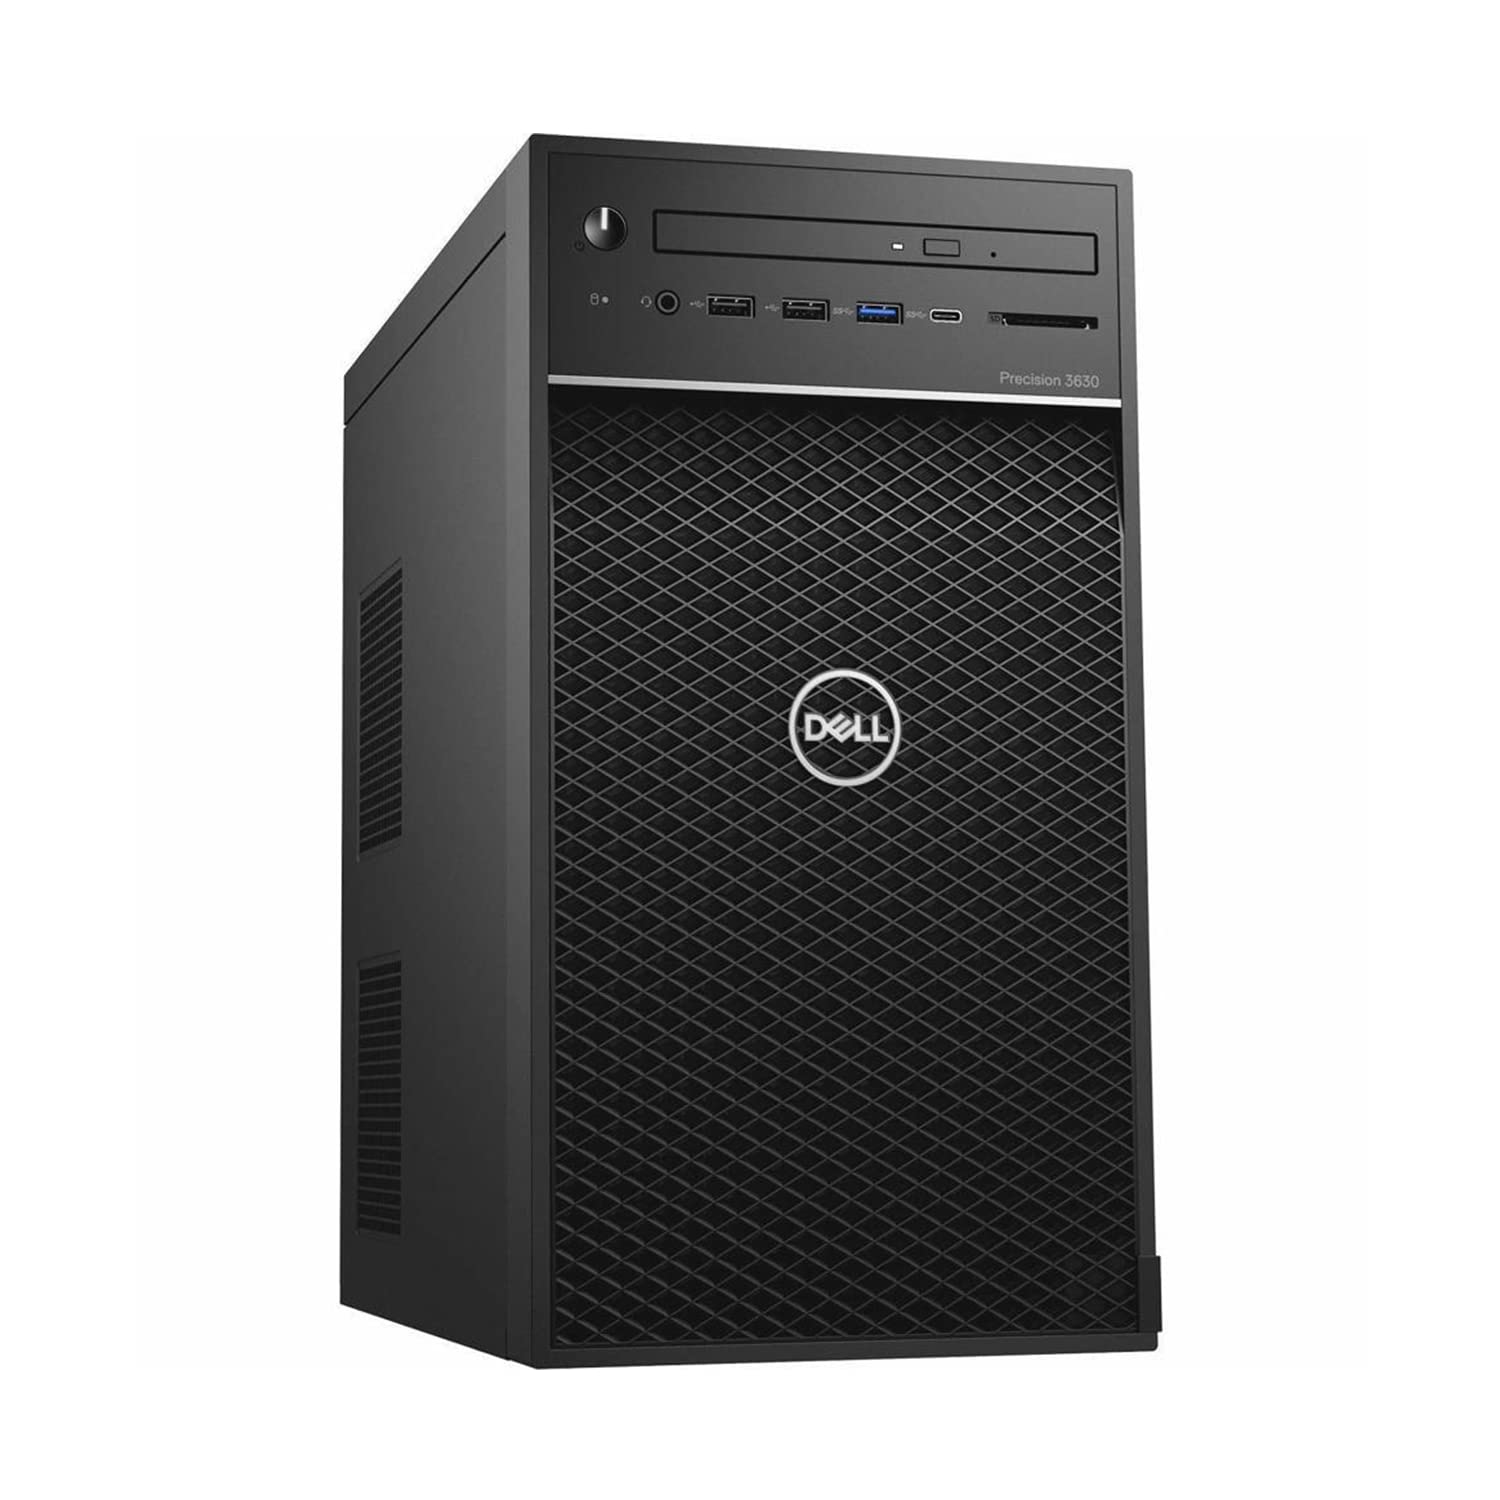 Dell Precision 3000 Series 3630 Business Tower Workstation, Intel Xeon E-2124G, Quadro P2000, 16GB RAM, 512GB PCIe SSD, SD Card Reader, Display Ports, Wi-Fi, Wired Keyboard & Mouse, Windows 11 Pro